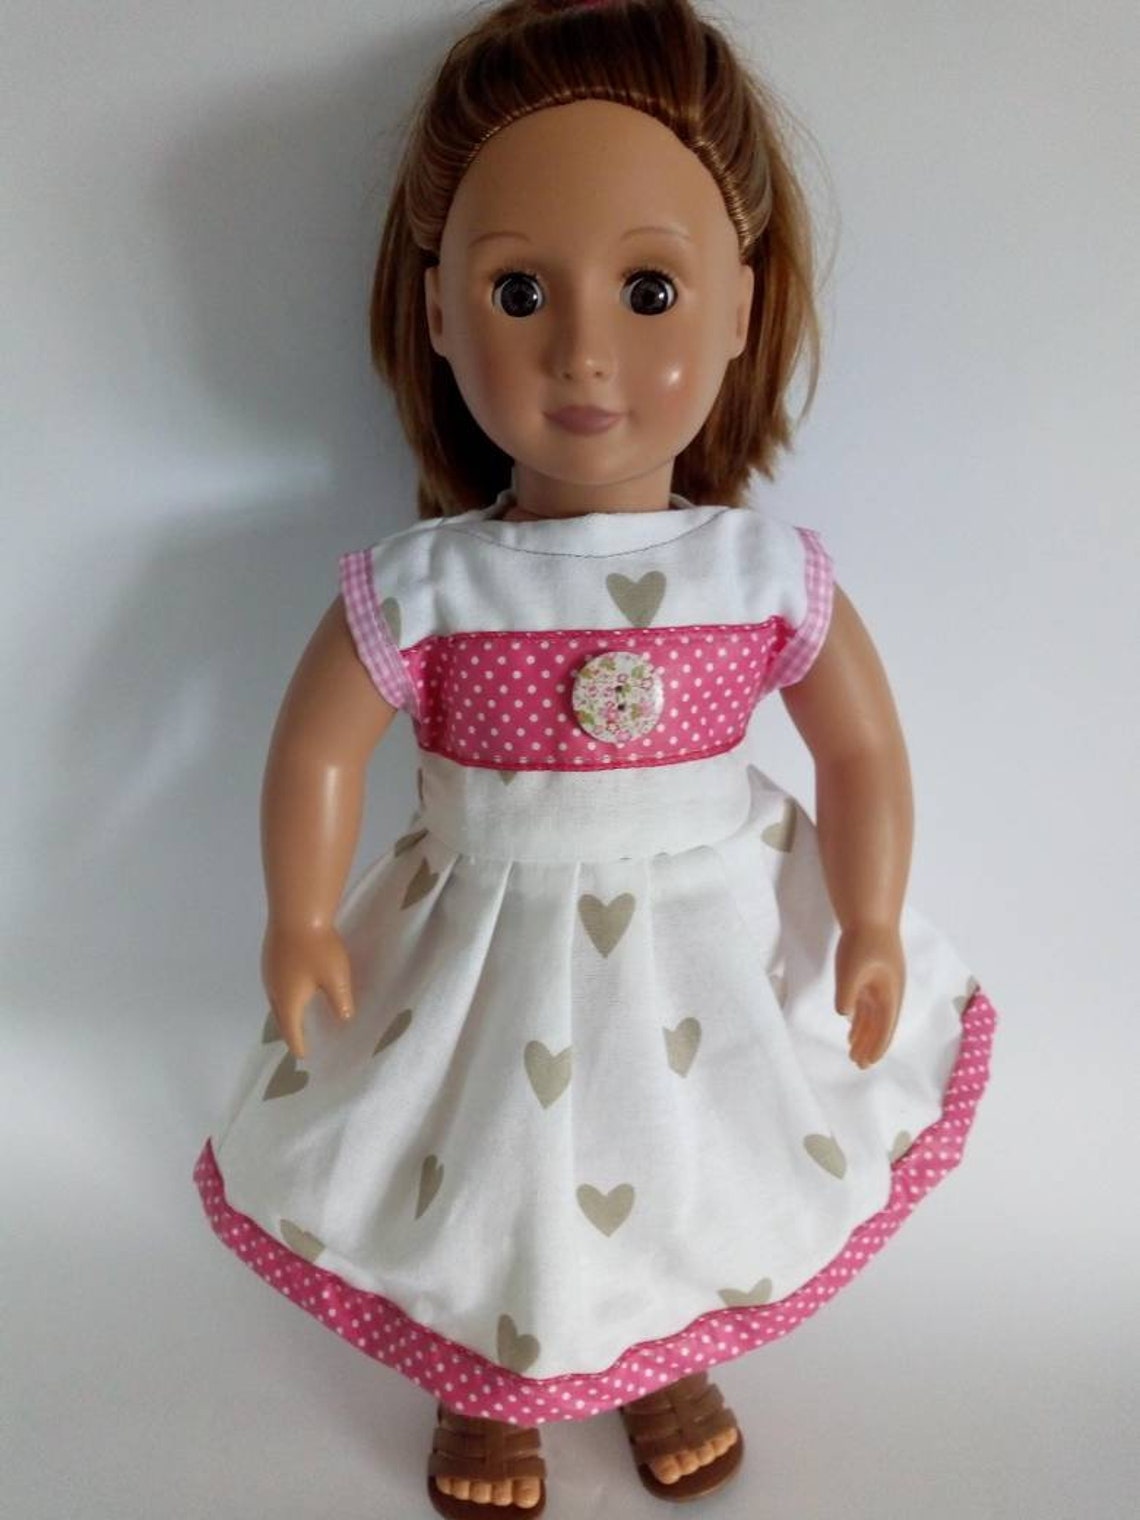 18 19 '' Inch Inches Inch Doll Dress White and Pink - Etsy